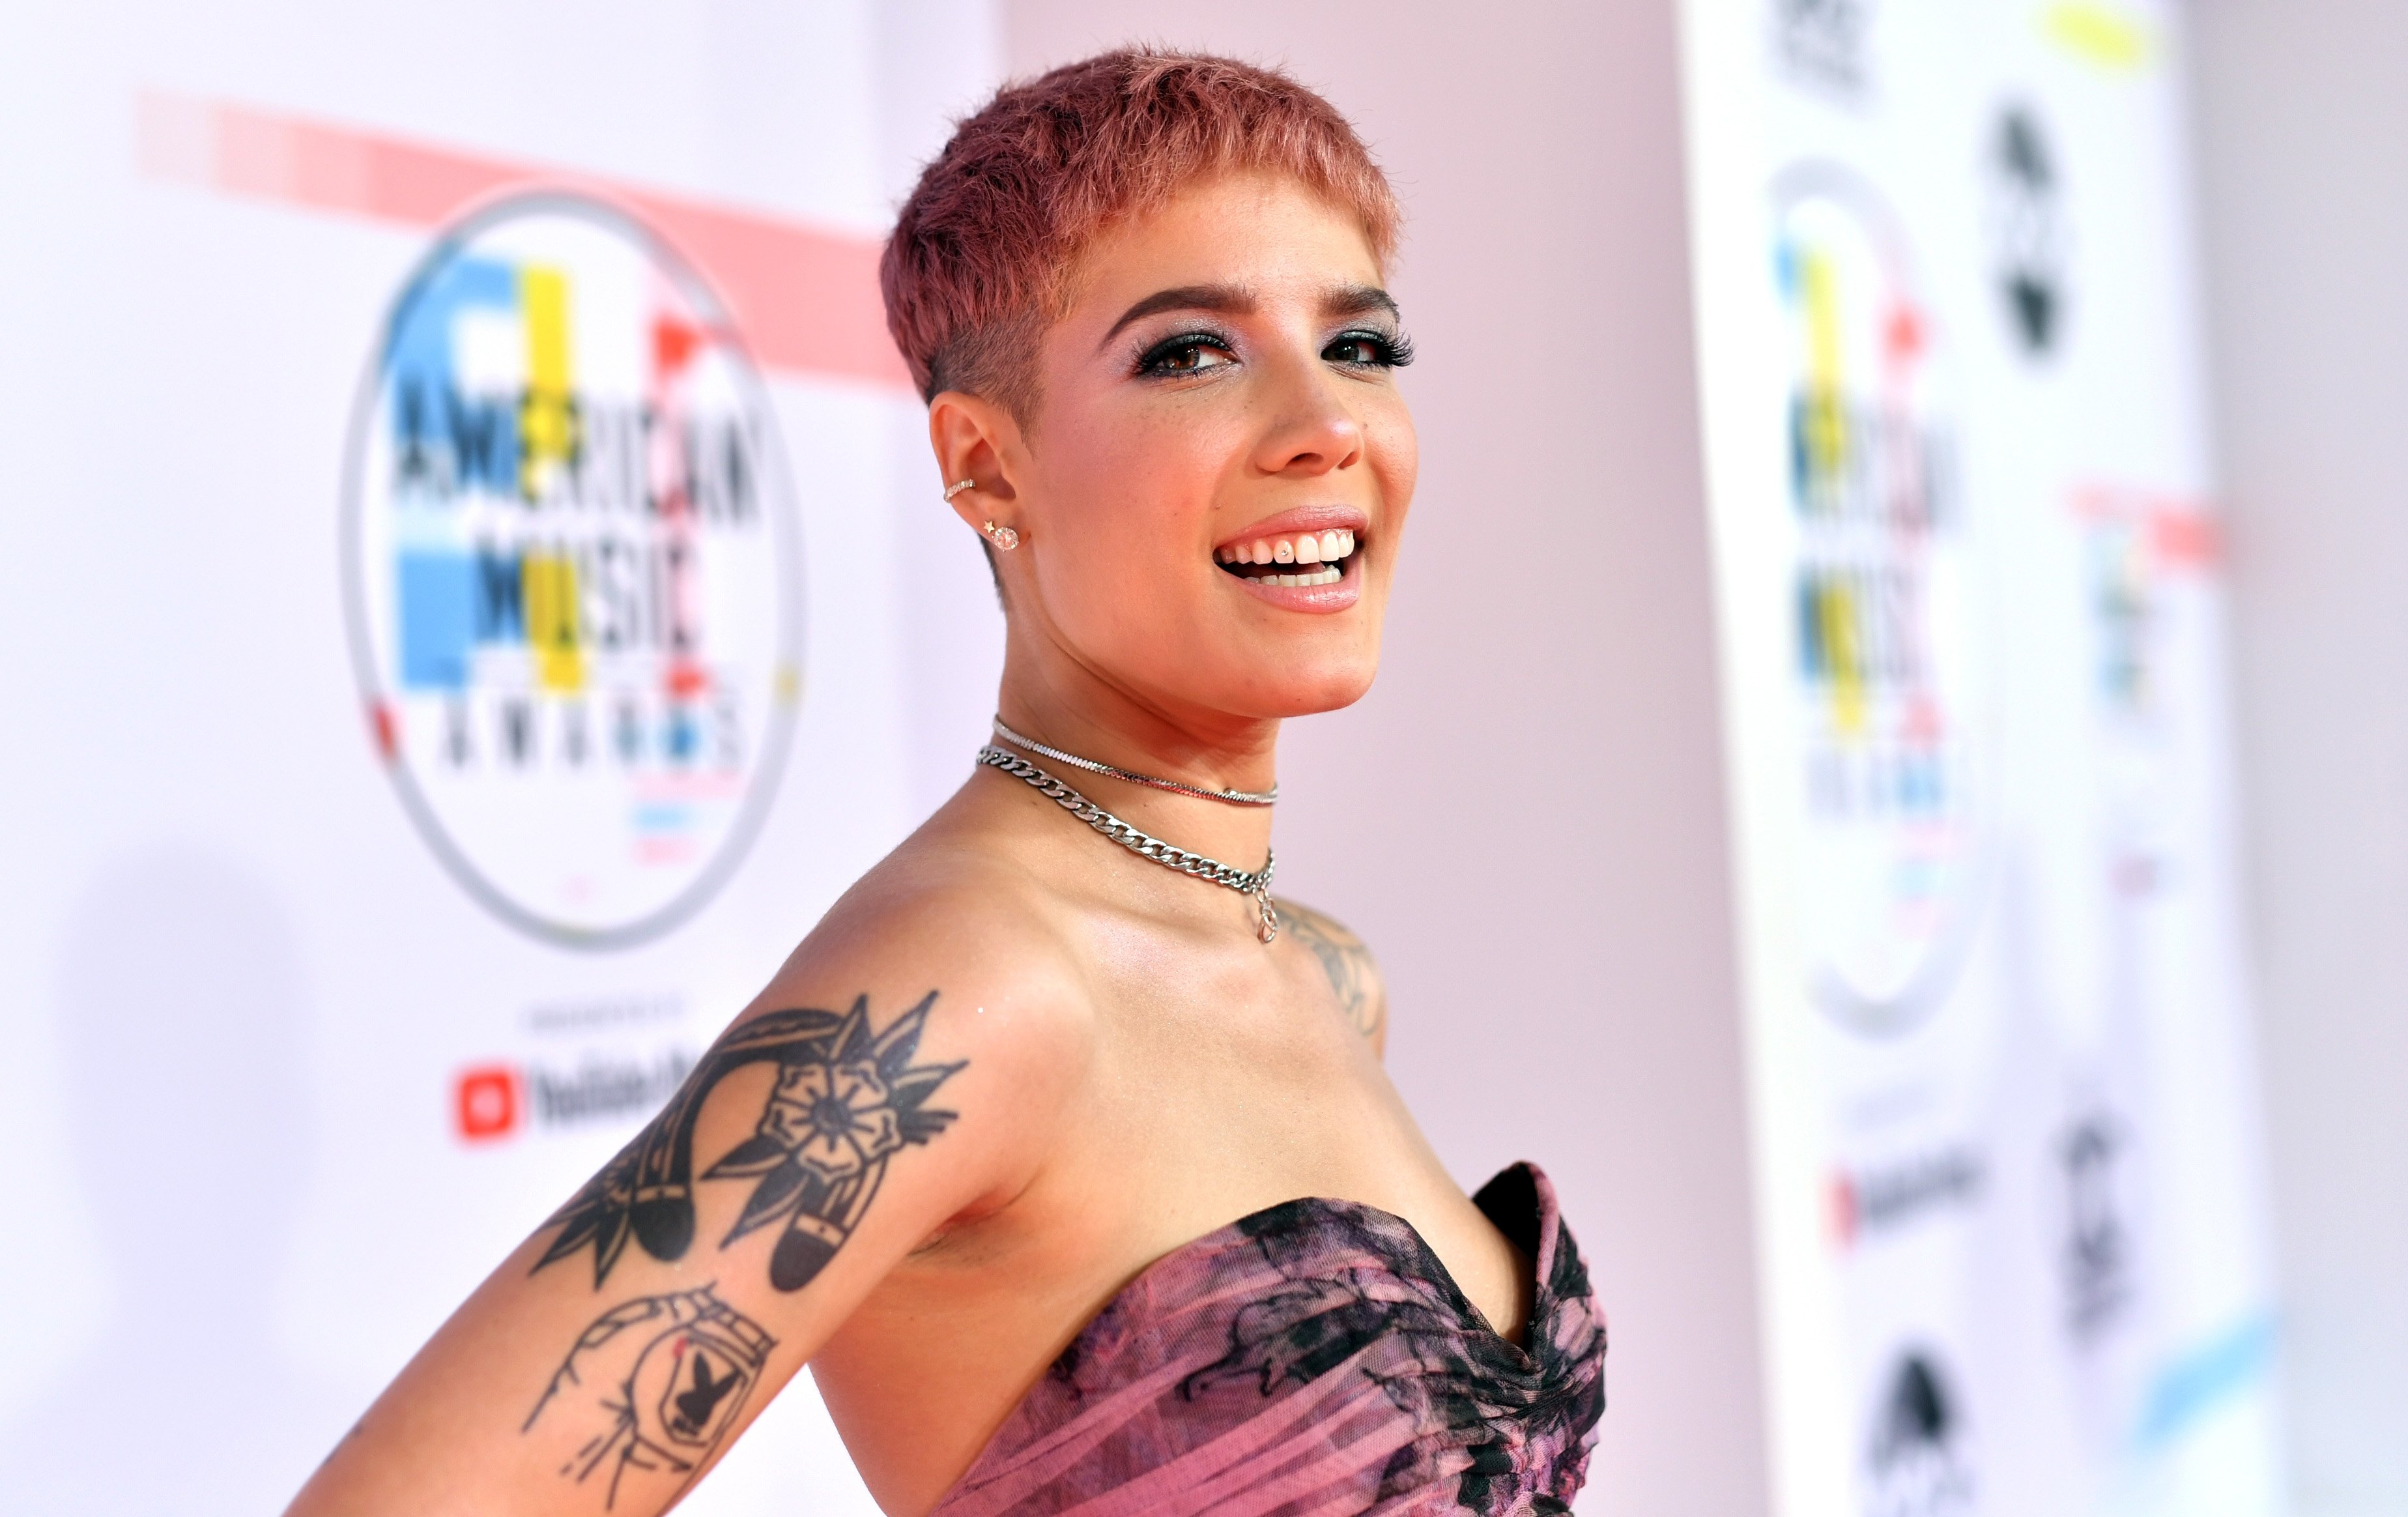 Halsey attends the 2018 American Music Awards